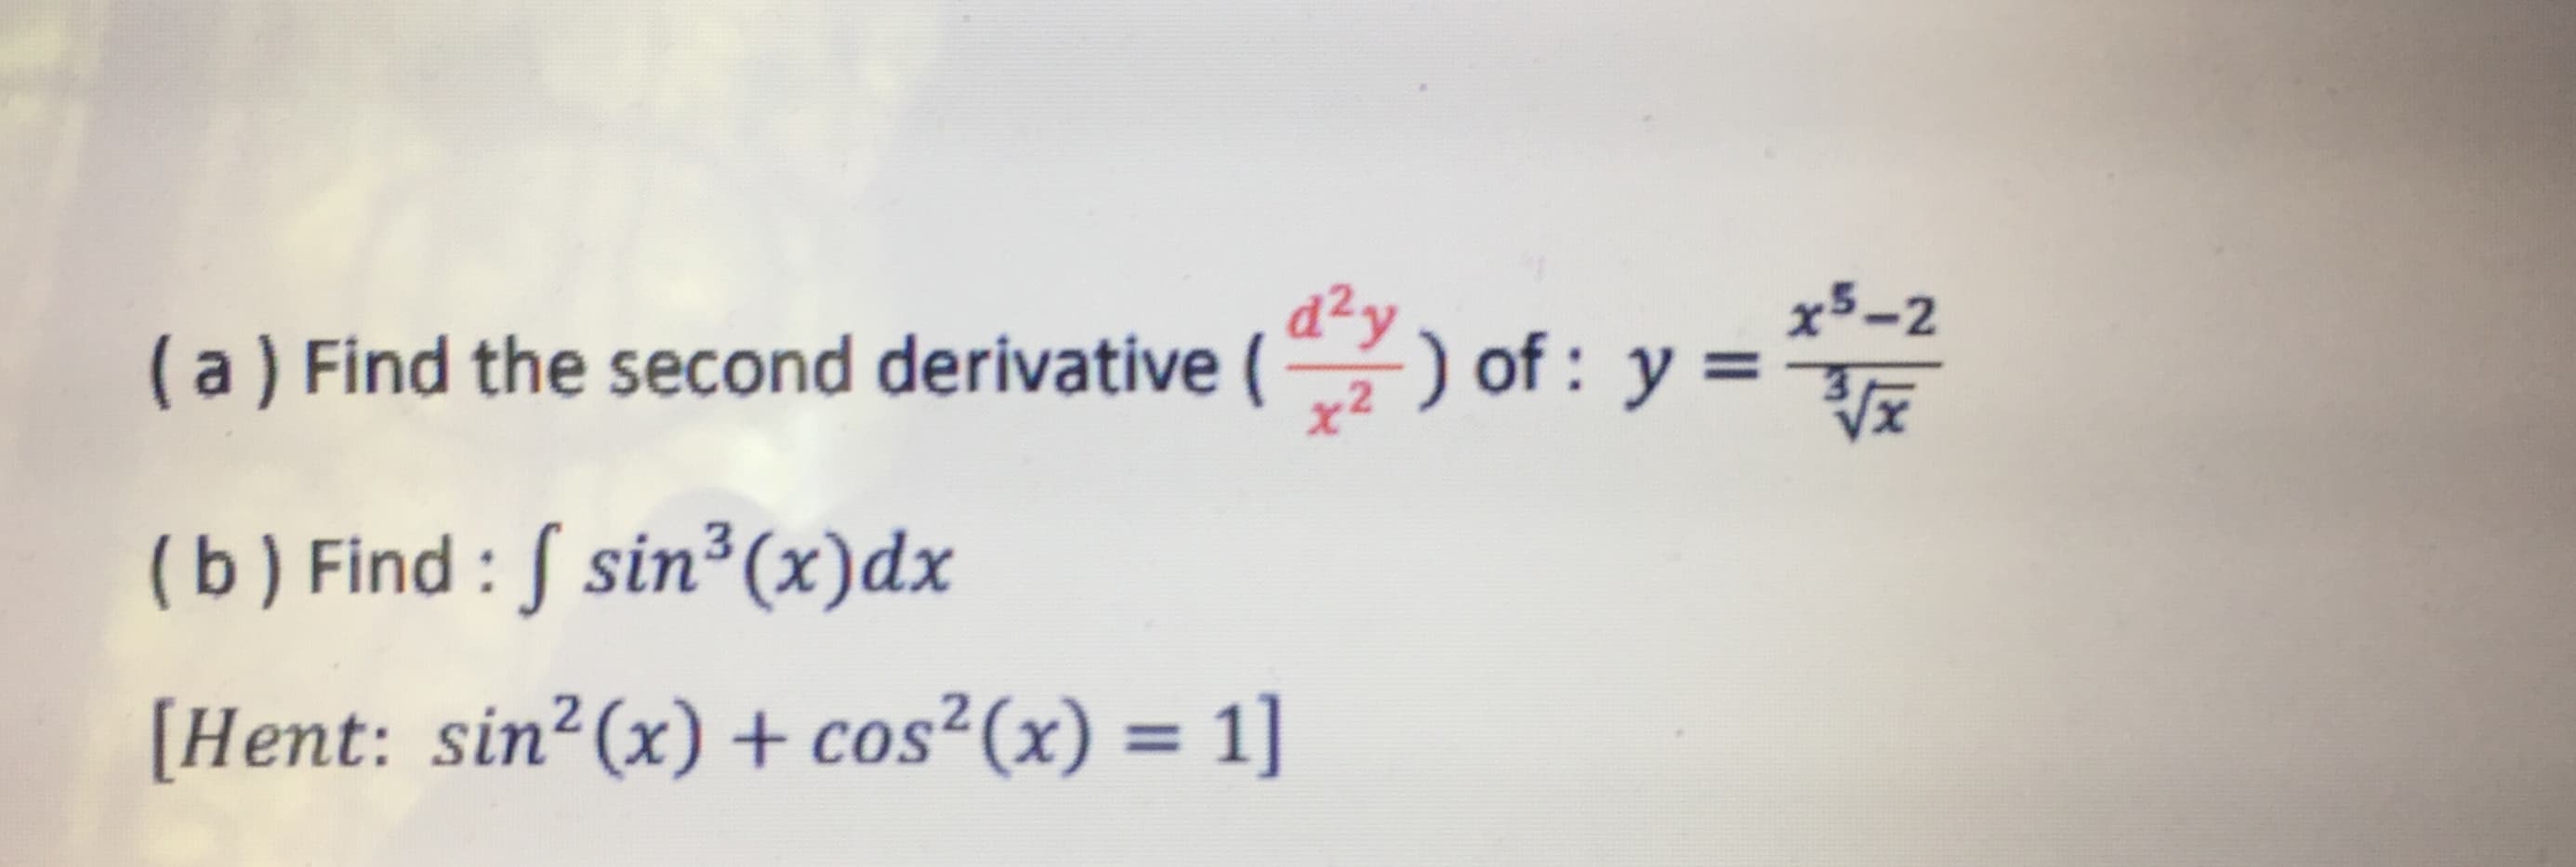 x5-2
d²y
) of : y =T
%3D
(a) Find the second derivative (
